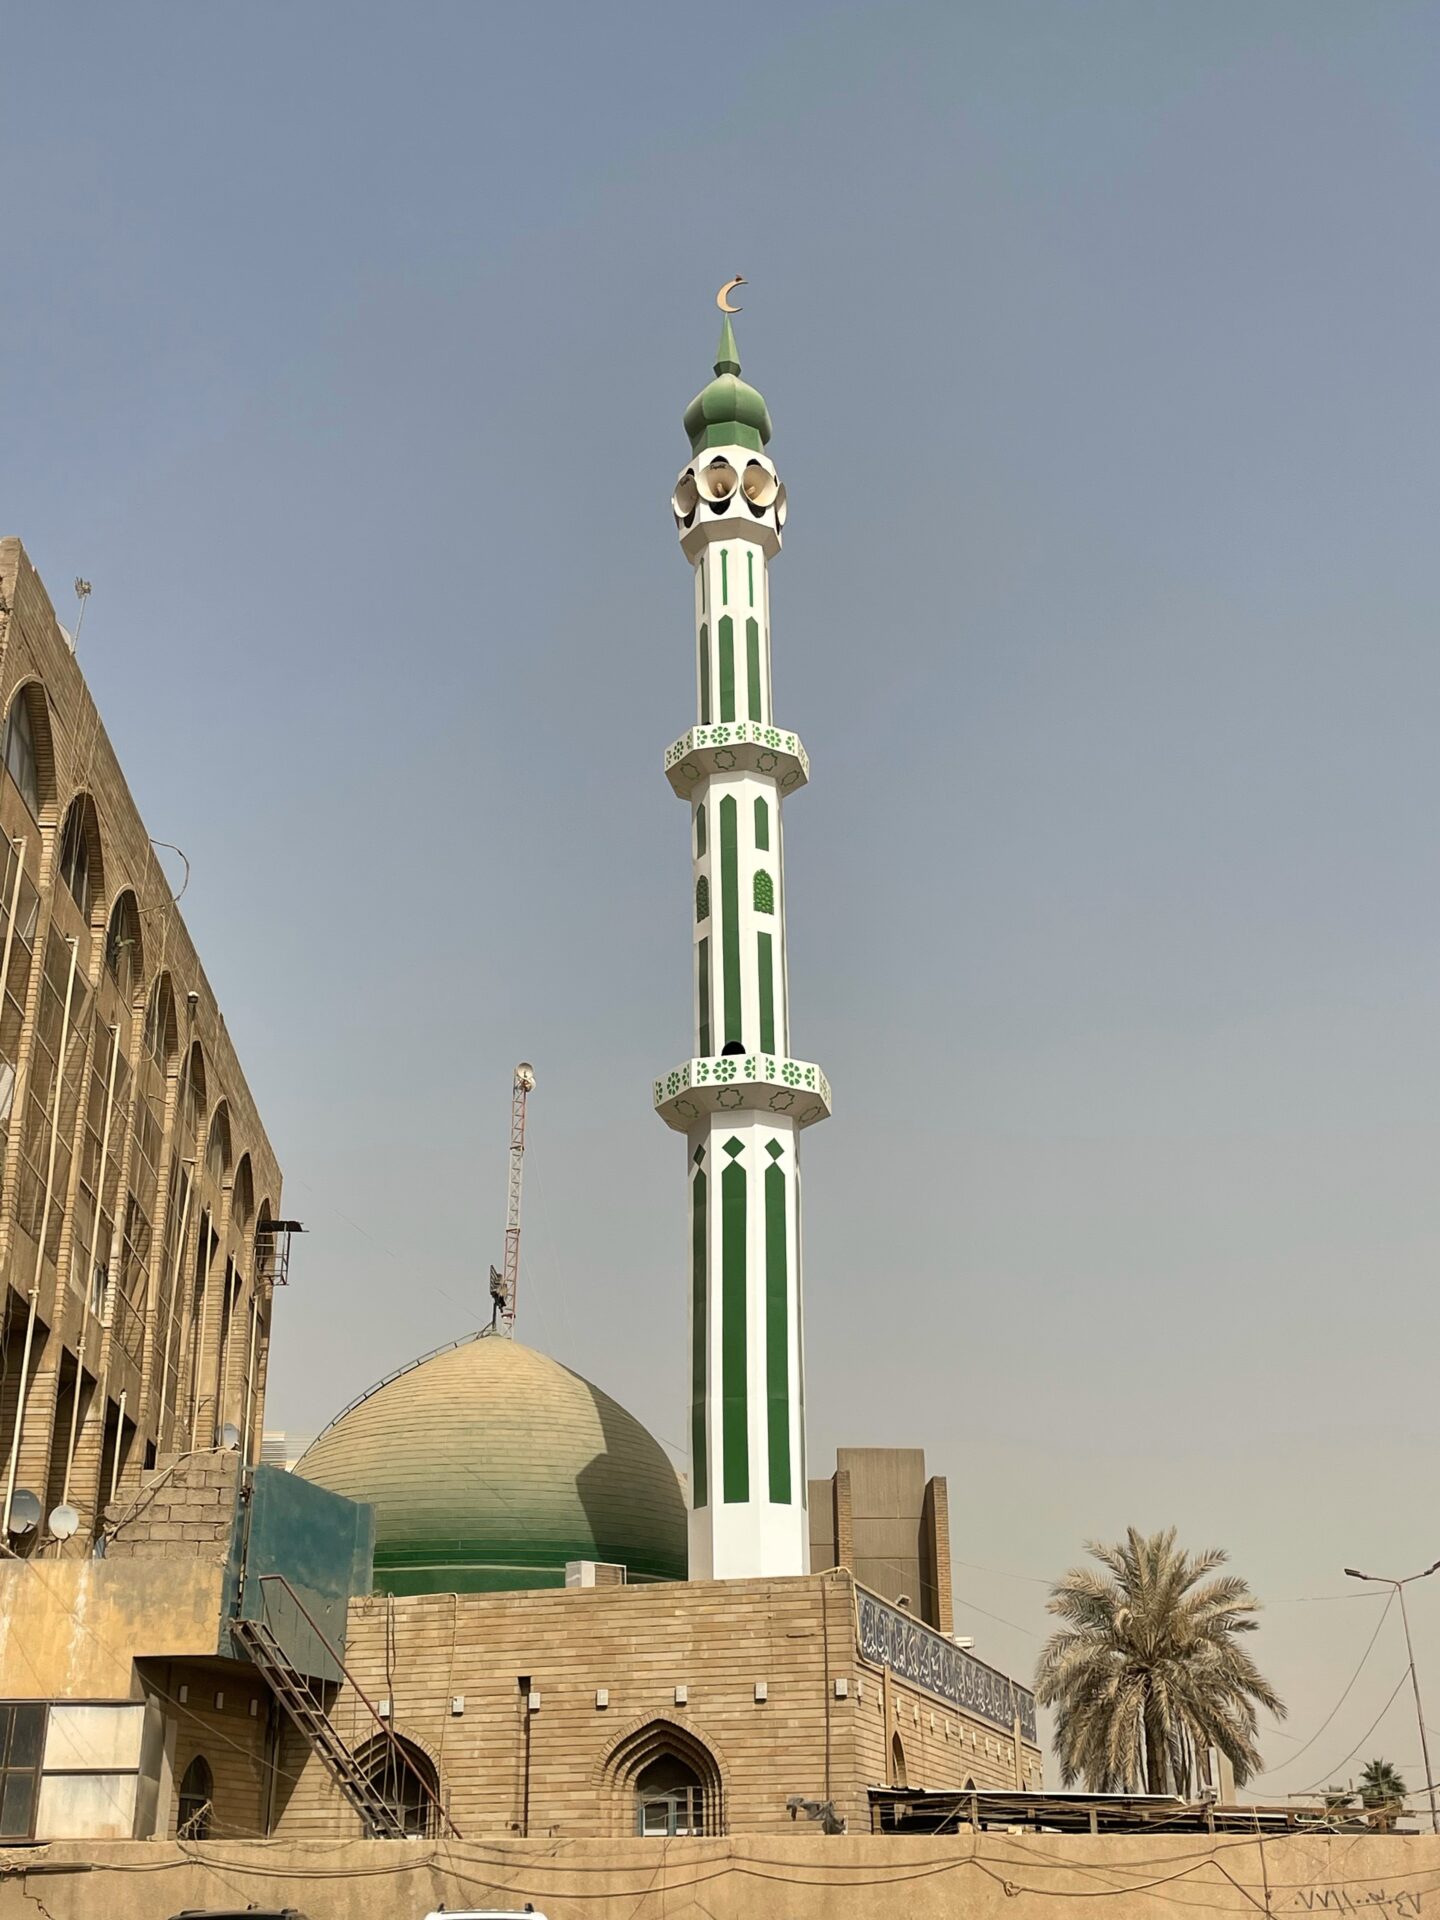 a green and white tower